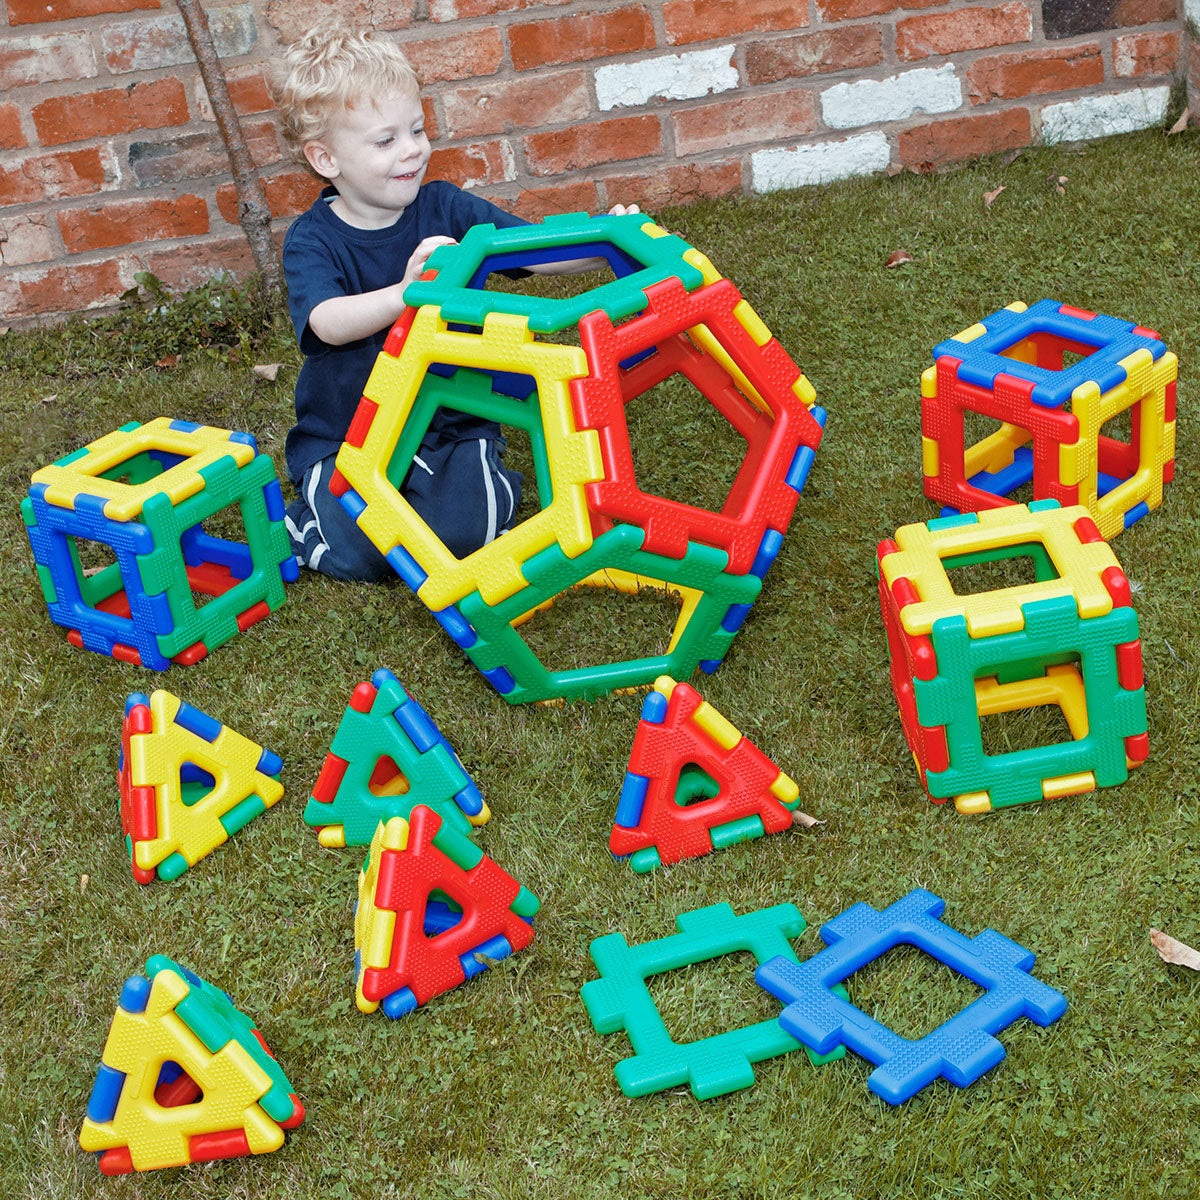 Giant Polydron Platonic Solids Set, Introducing the Giant Polydron Platonic Solids Set - the perfect educational tool for both young and older children. This versatile set allows young children to investigate and explore, while older children can challenge themselves by building more advanced constructions. This set features the five Platonic Solids, making it an essential addition to any early years and special needs environments. With 52 pieces in four vibrant colors, including 20 squares, 20 triangles, a